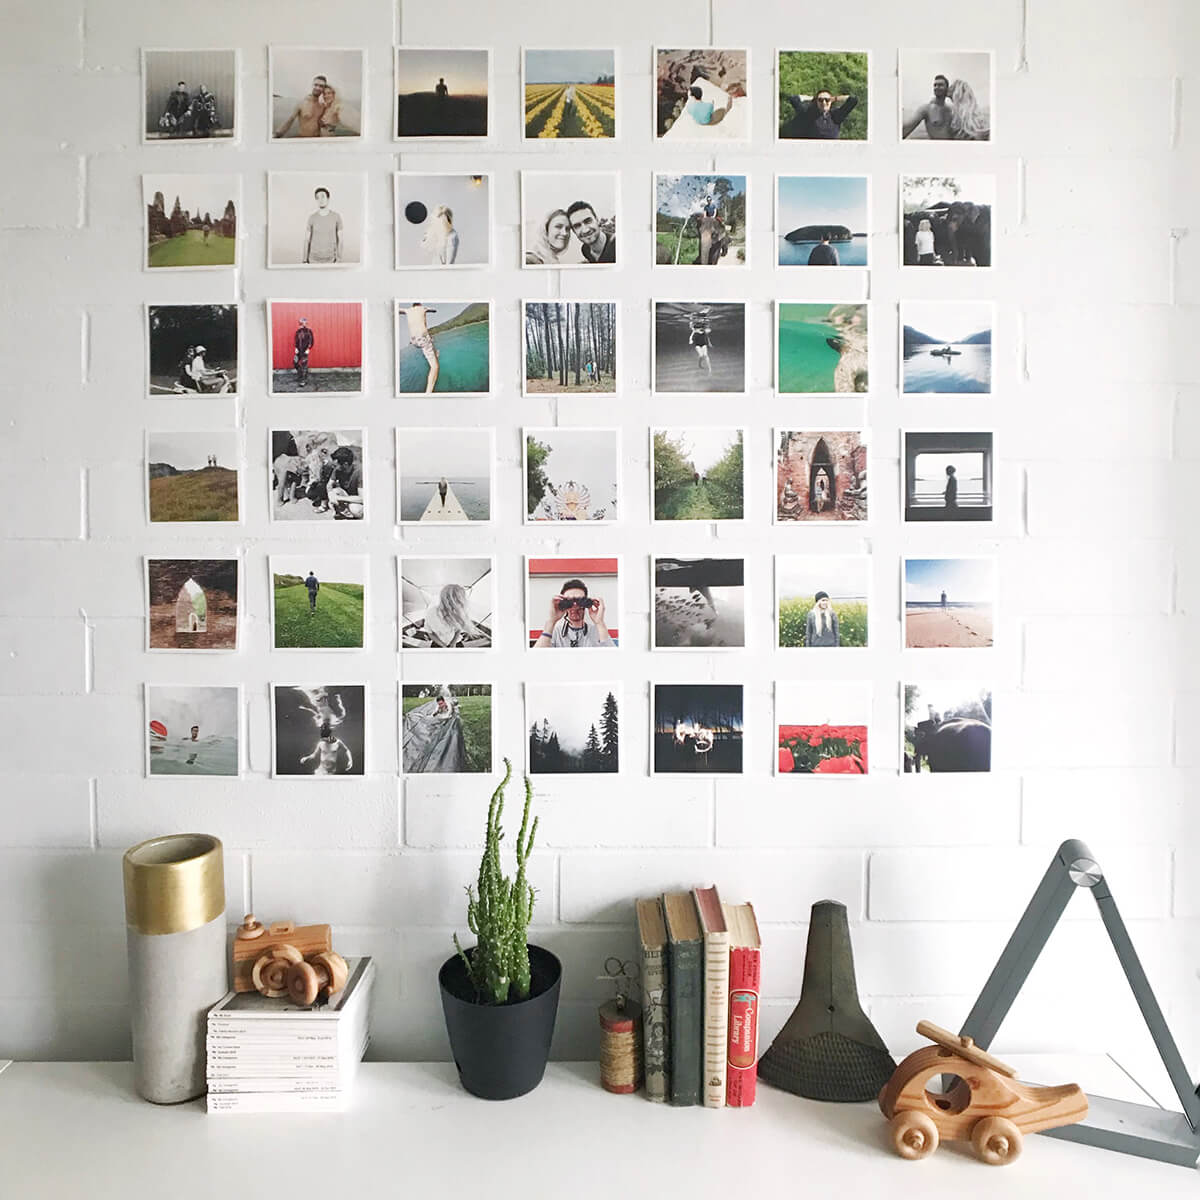 Square prints arranged in a large grid on the wall